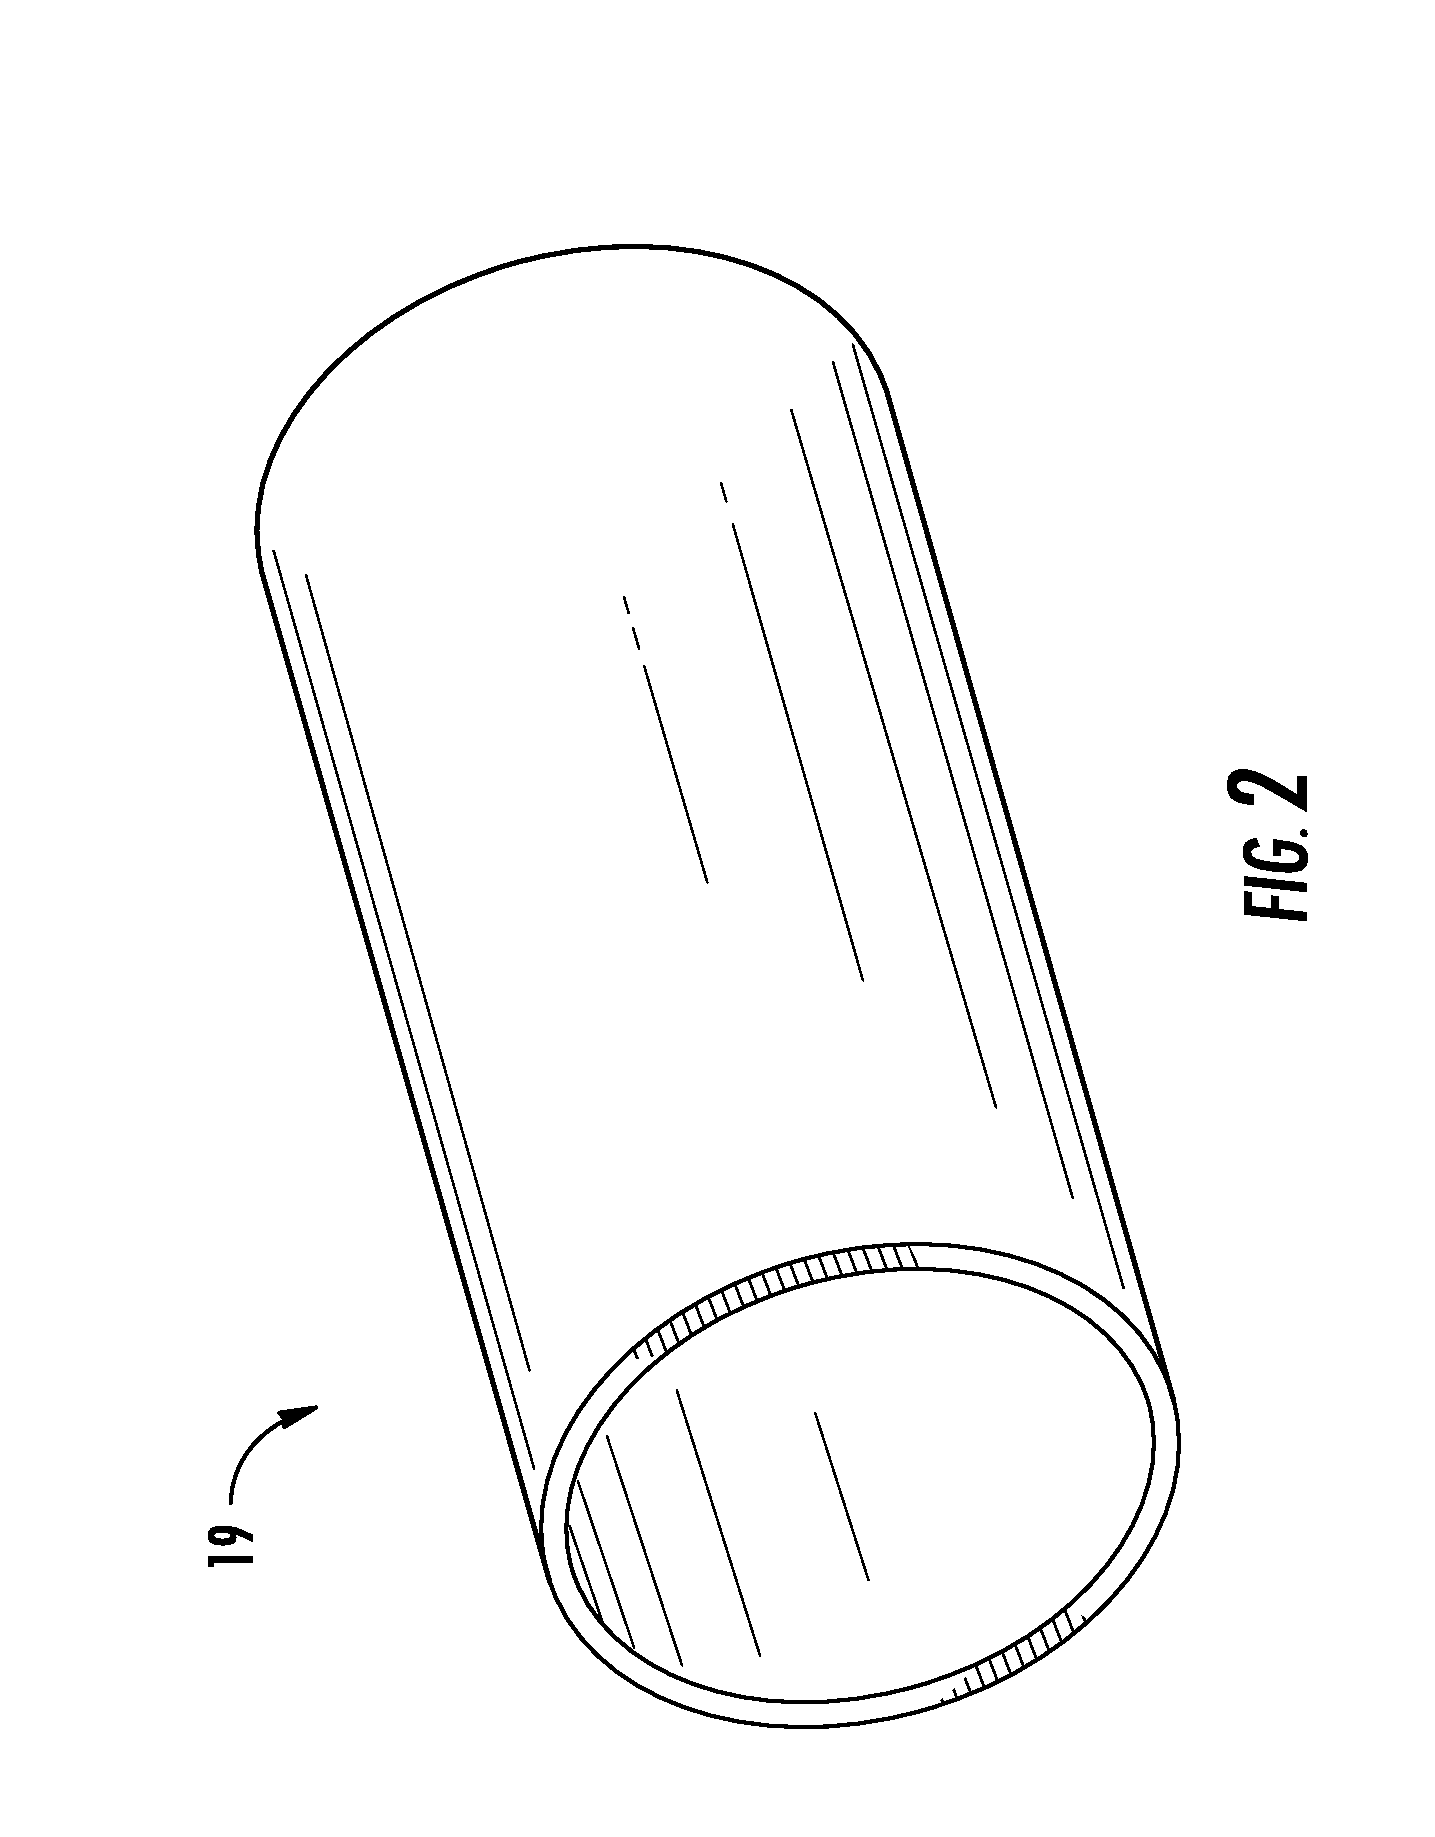 Fiber Optic Cable Assemblies with Fiber Access Apertures and Methods of Assembly